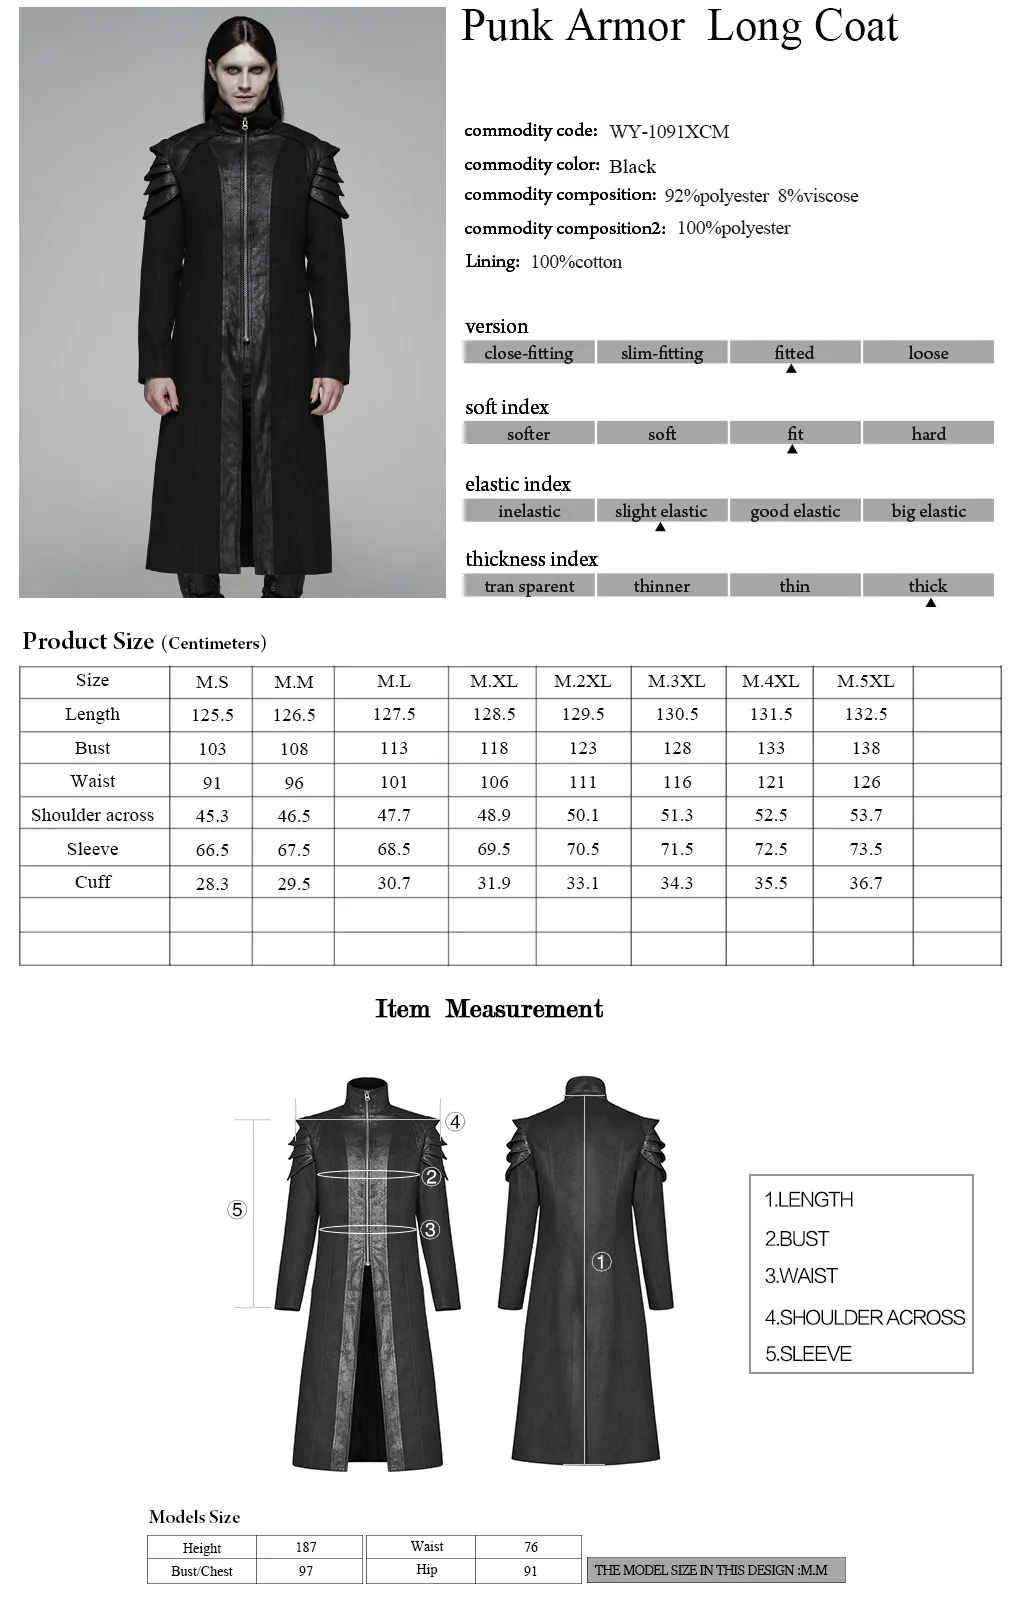 

PUNK RAVE Mens Punk Armor Long Coat Double-side-woolen with Pockets on Both Sides Party Stage Performance Winter Long Jacket